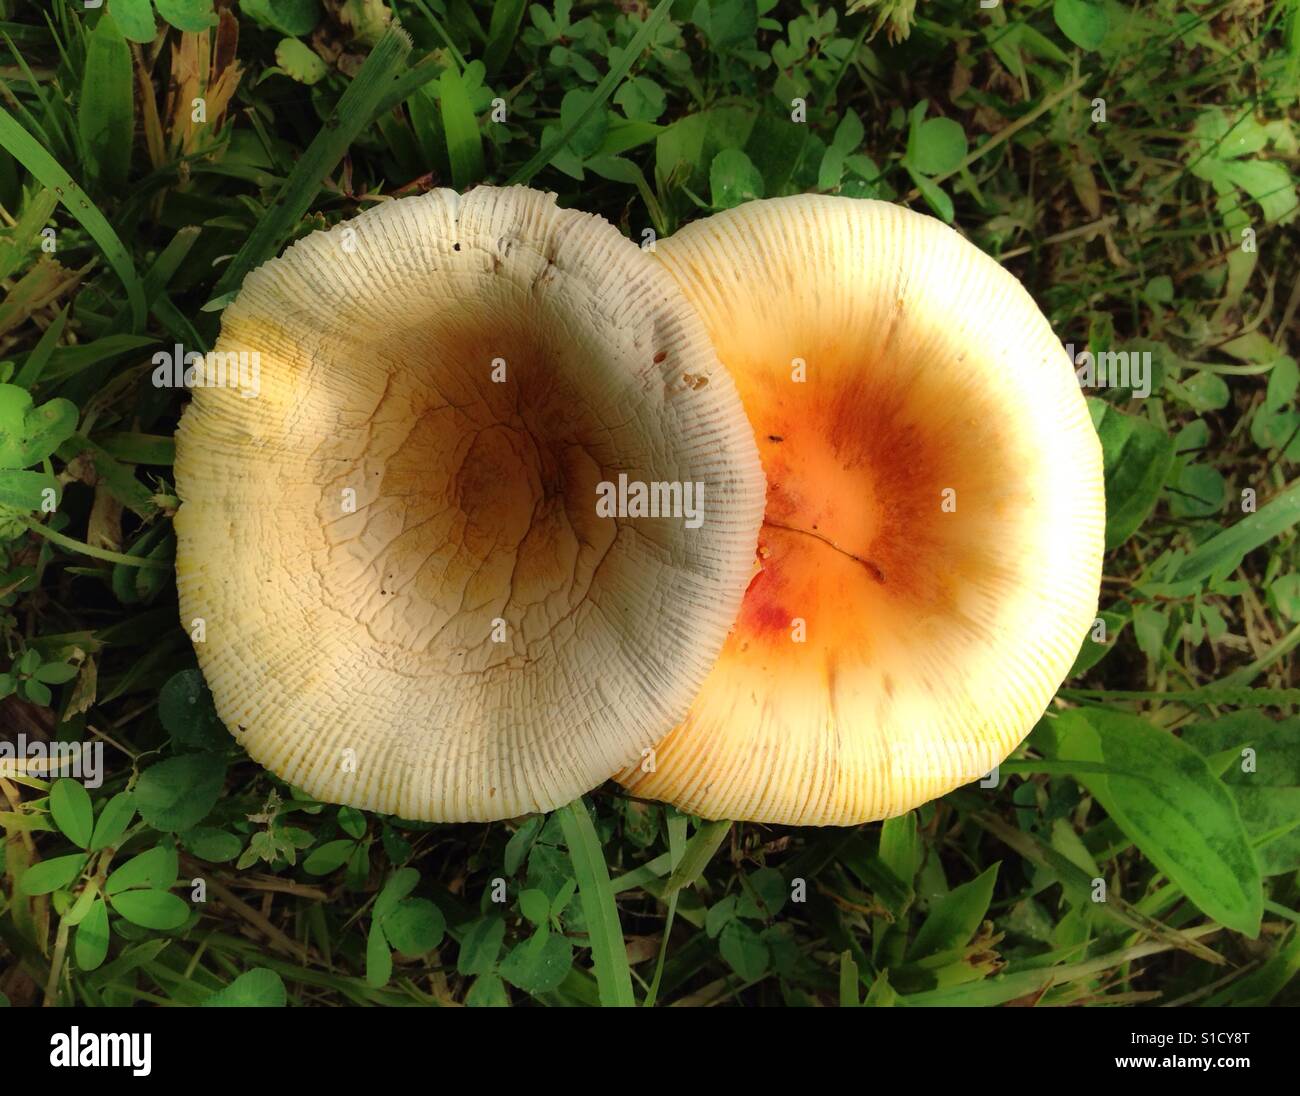 Mushrooms; young and old. Stock Photo